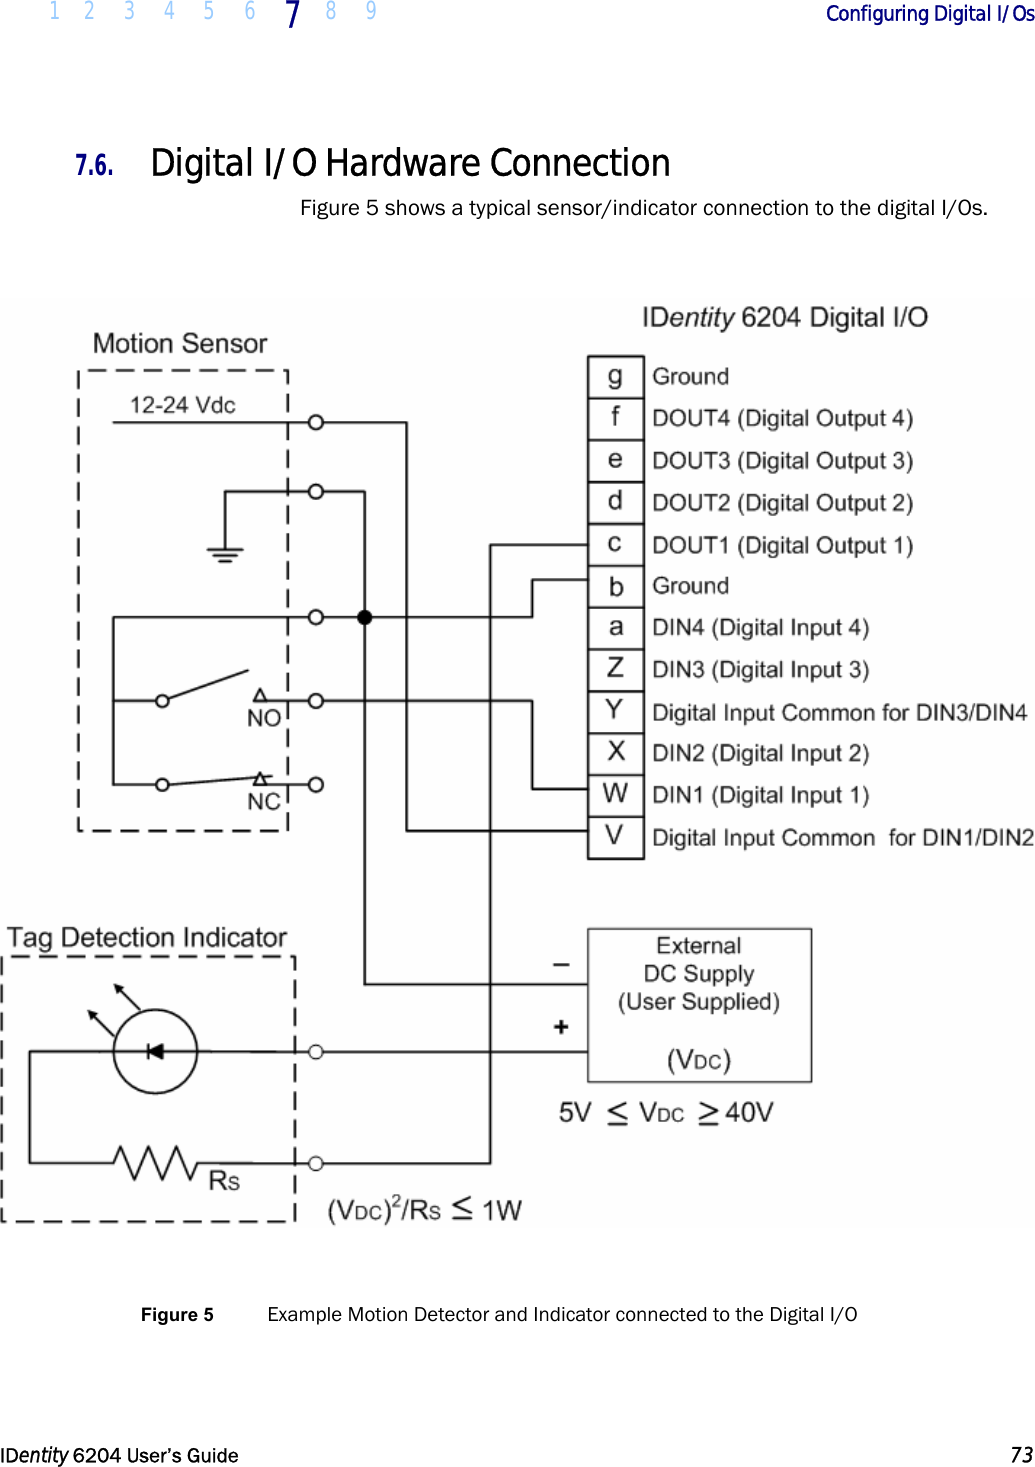  1 2 3 4 5 6 7  8 9        Configuring Digital I/Os   IDentity 6204 User’s Guide  73  7.6. Digital I/O Hardware Connection Figure 5 shows a typical sensor/indicator connection to the digital I/Os.    Figure 5  Example Motion Detector and Indicator connected to the Digital I/O  